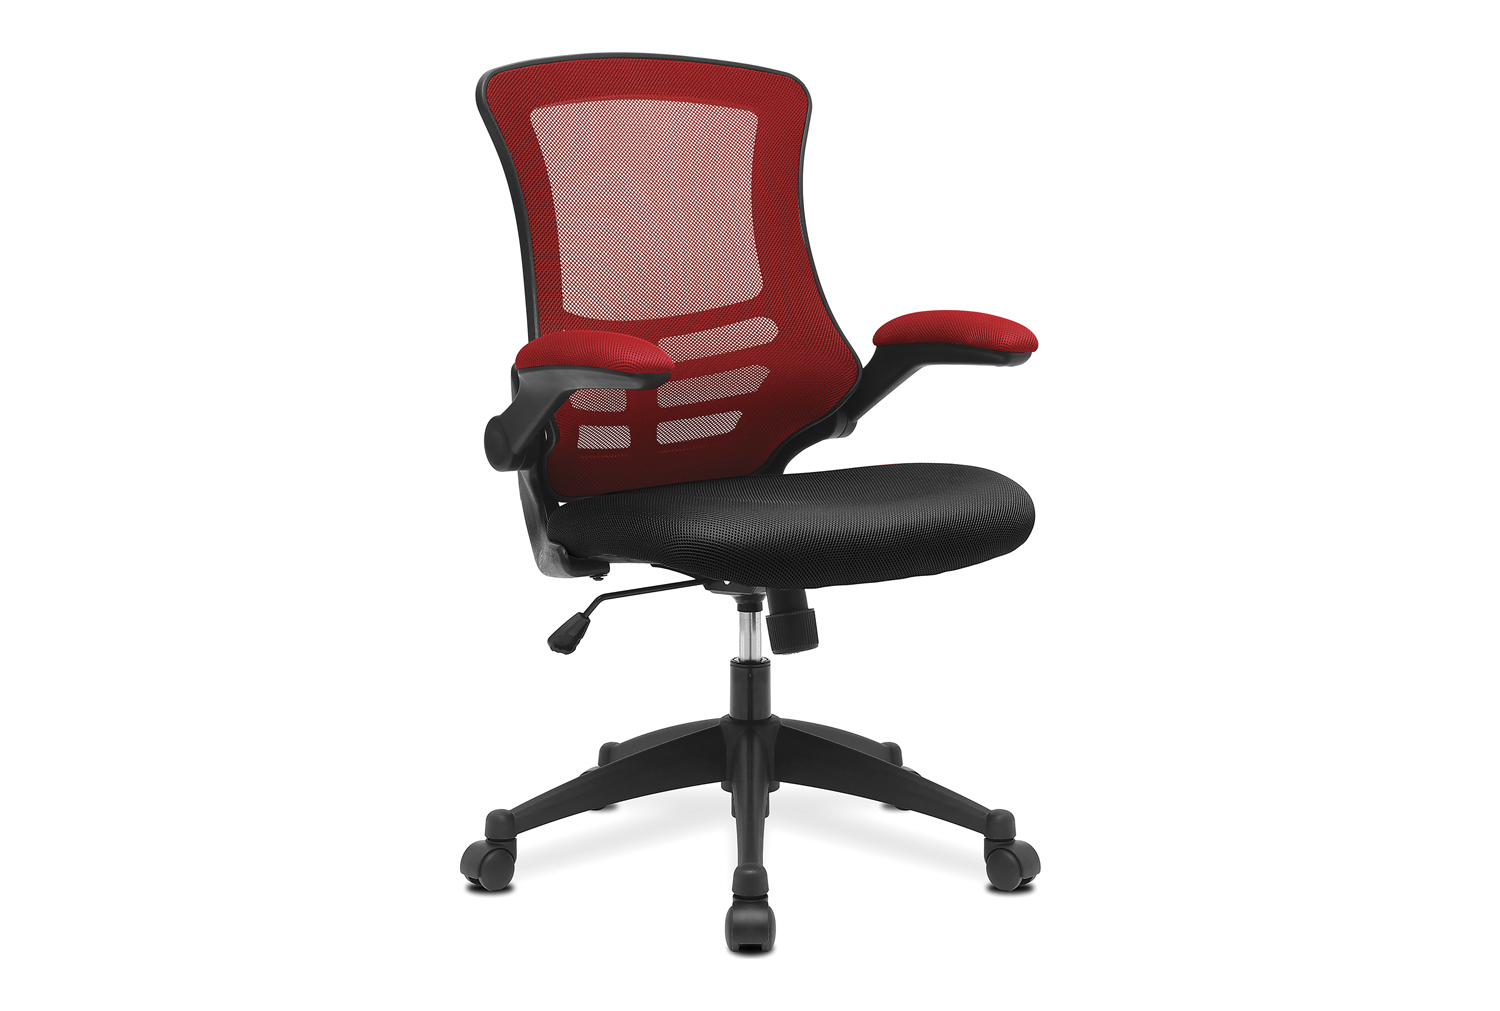 Moon High Mesh Back Operator Office Chair With Black Base (Red/Black), Fully Installed